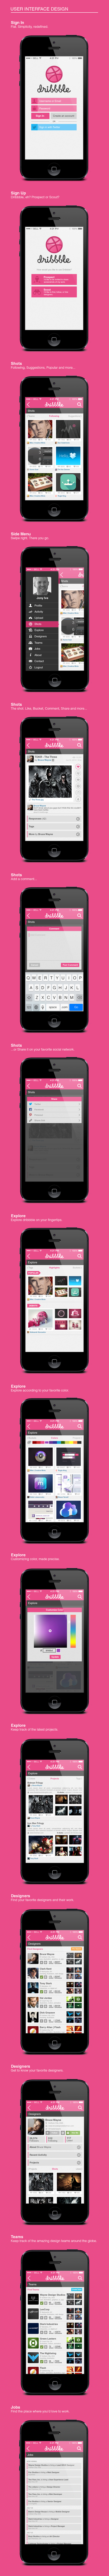 dribbble  ios7 app mobile iphone flat design development UI Interface interaction user experience user interface ux Mobile app